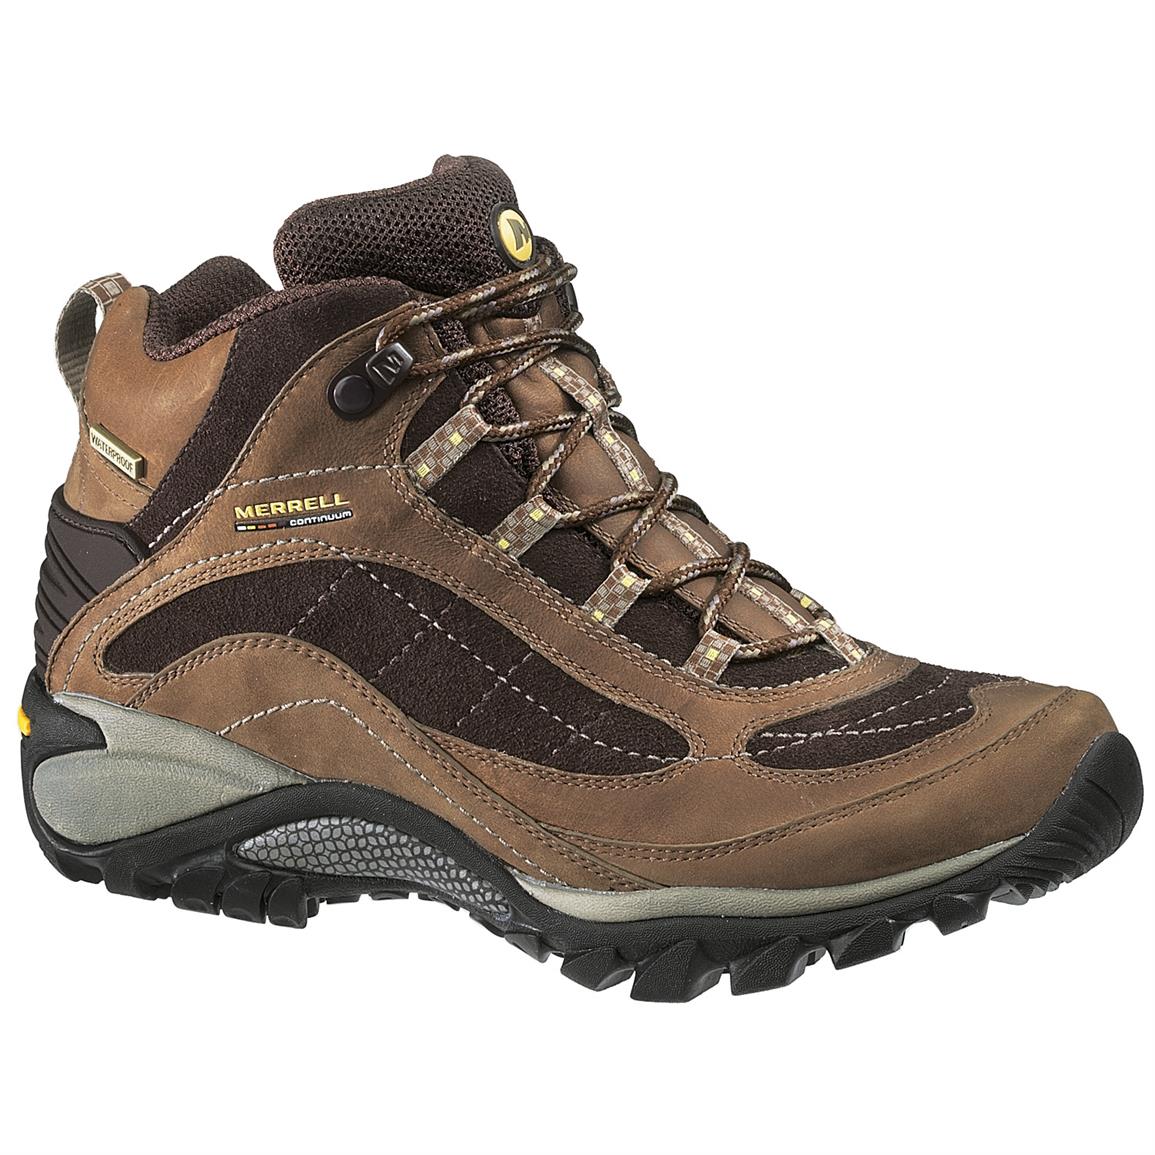 Women S Merrell Siren Hiking Boots Waterproof Mid Hiking Boots Shoes At Sportsman